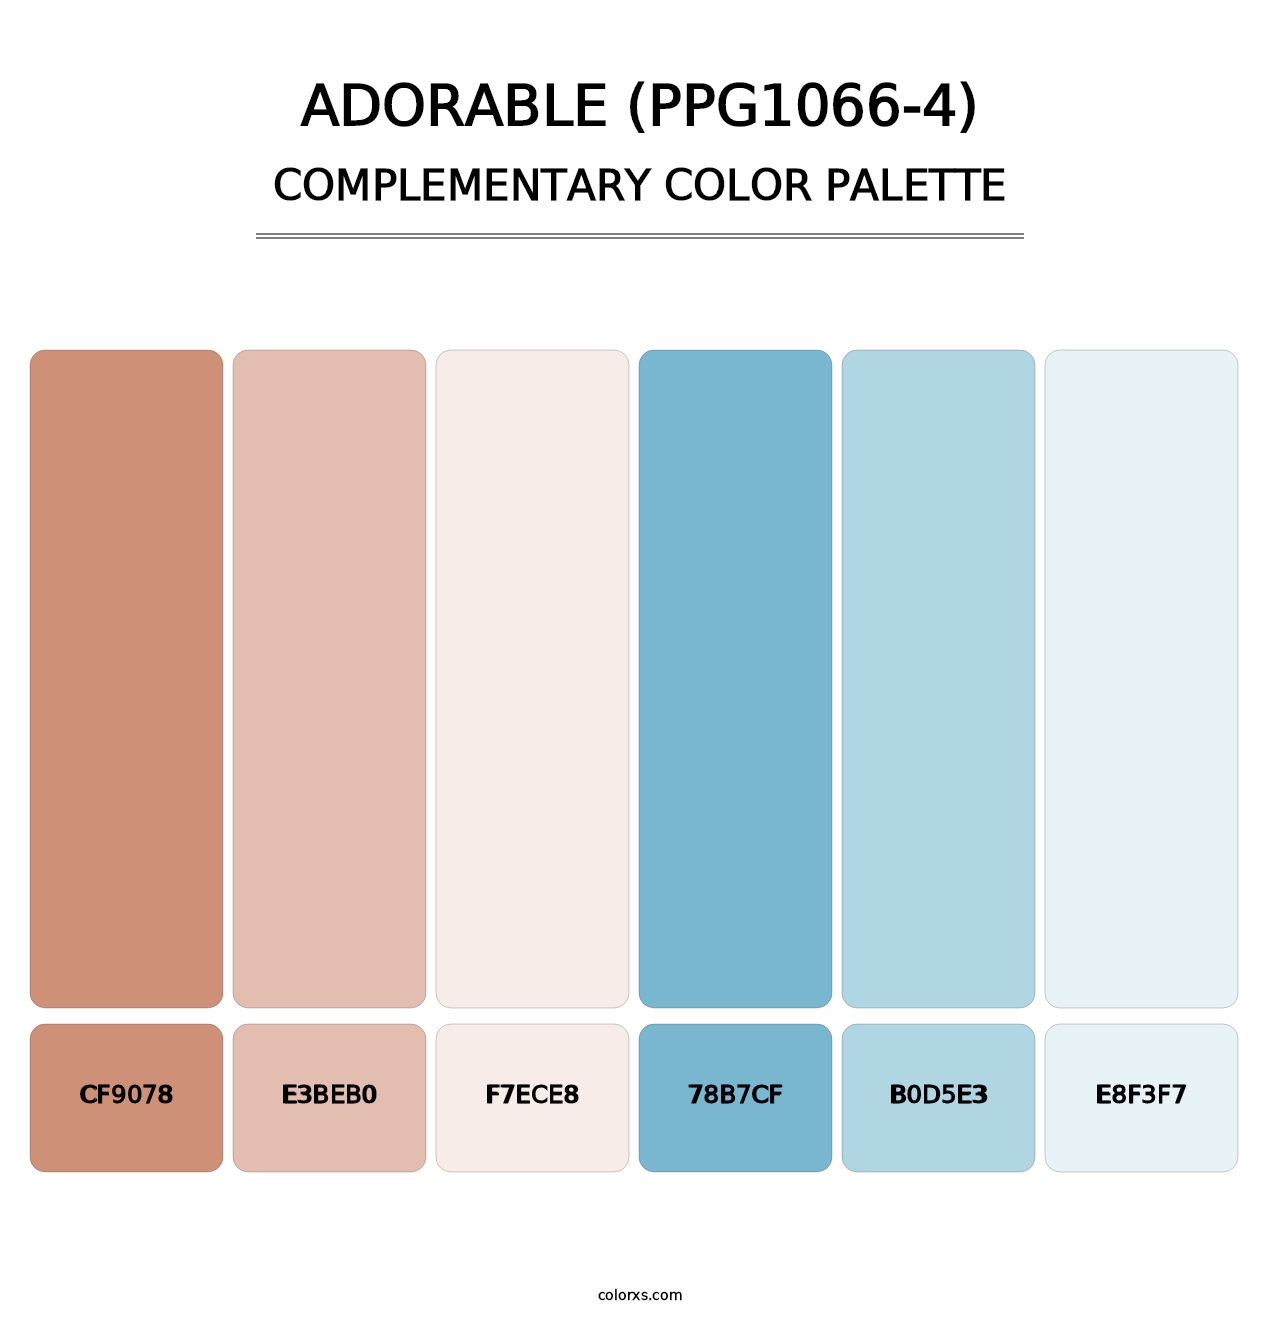 Adorable (PPG1066-4) - Complementary Color Palette